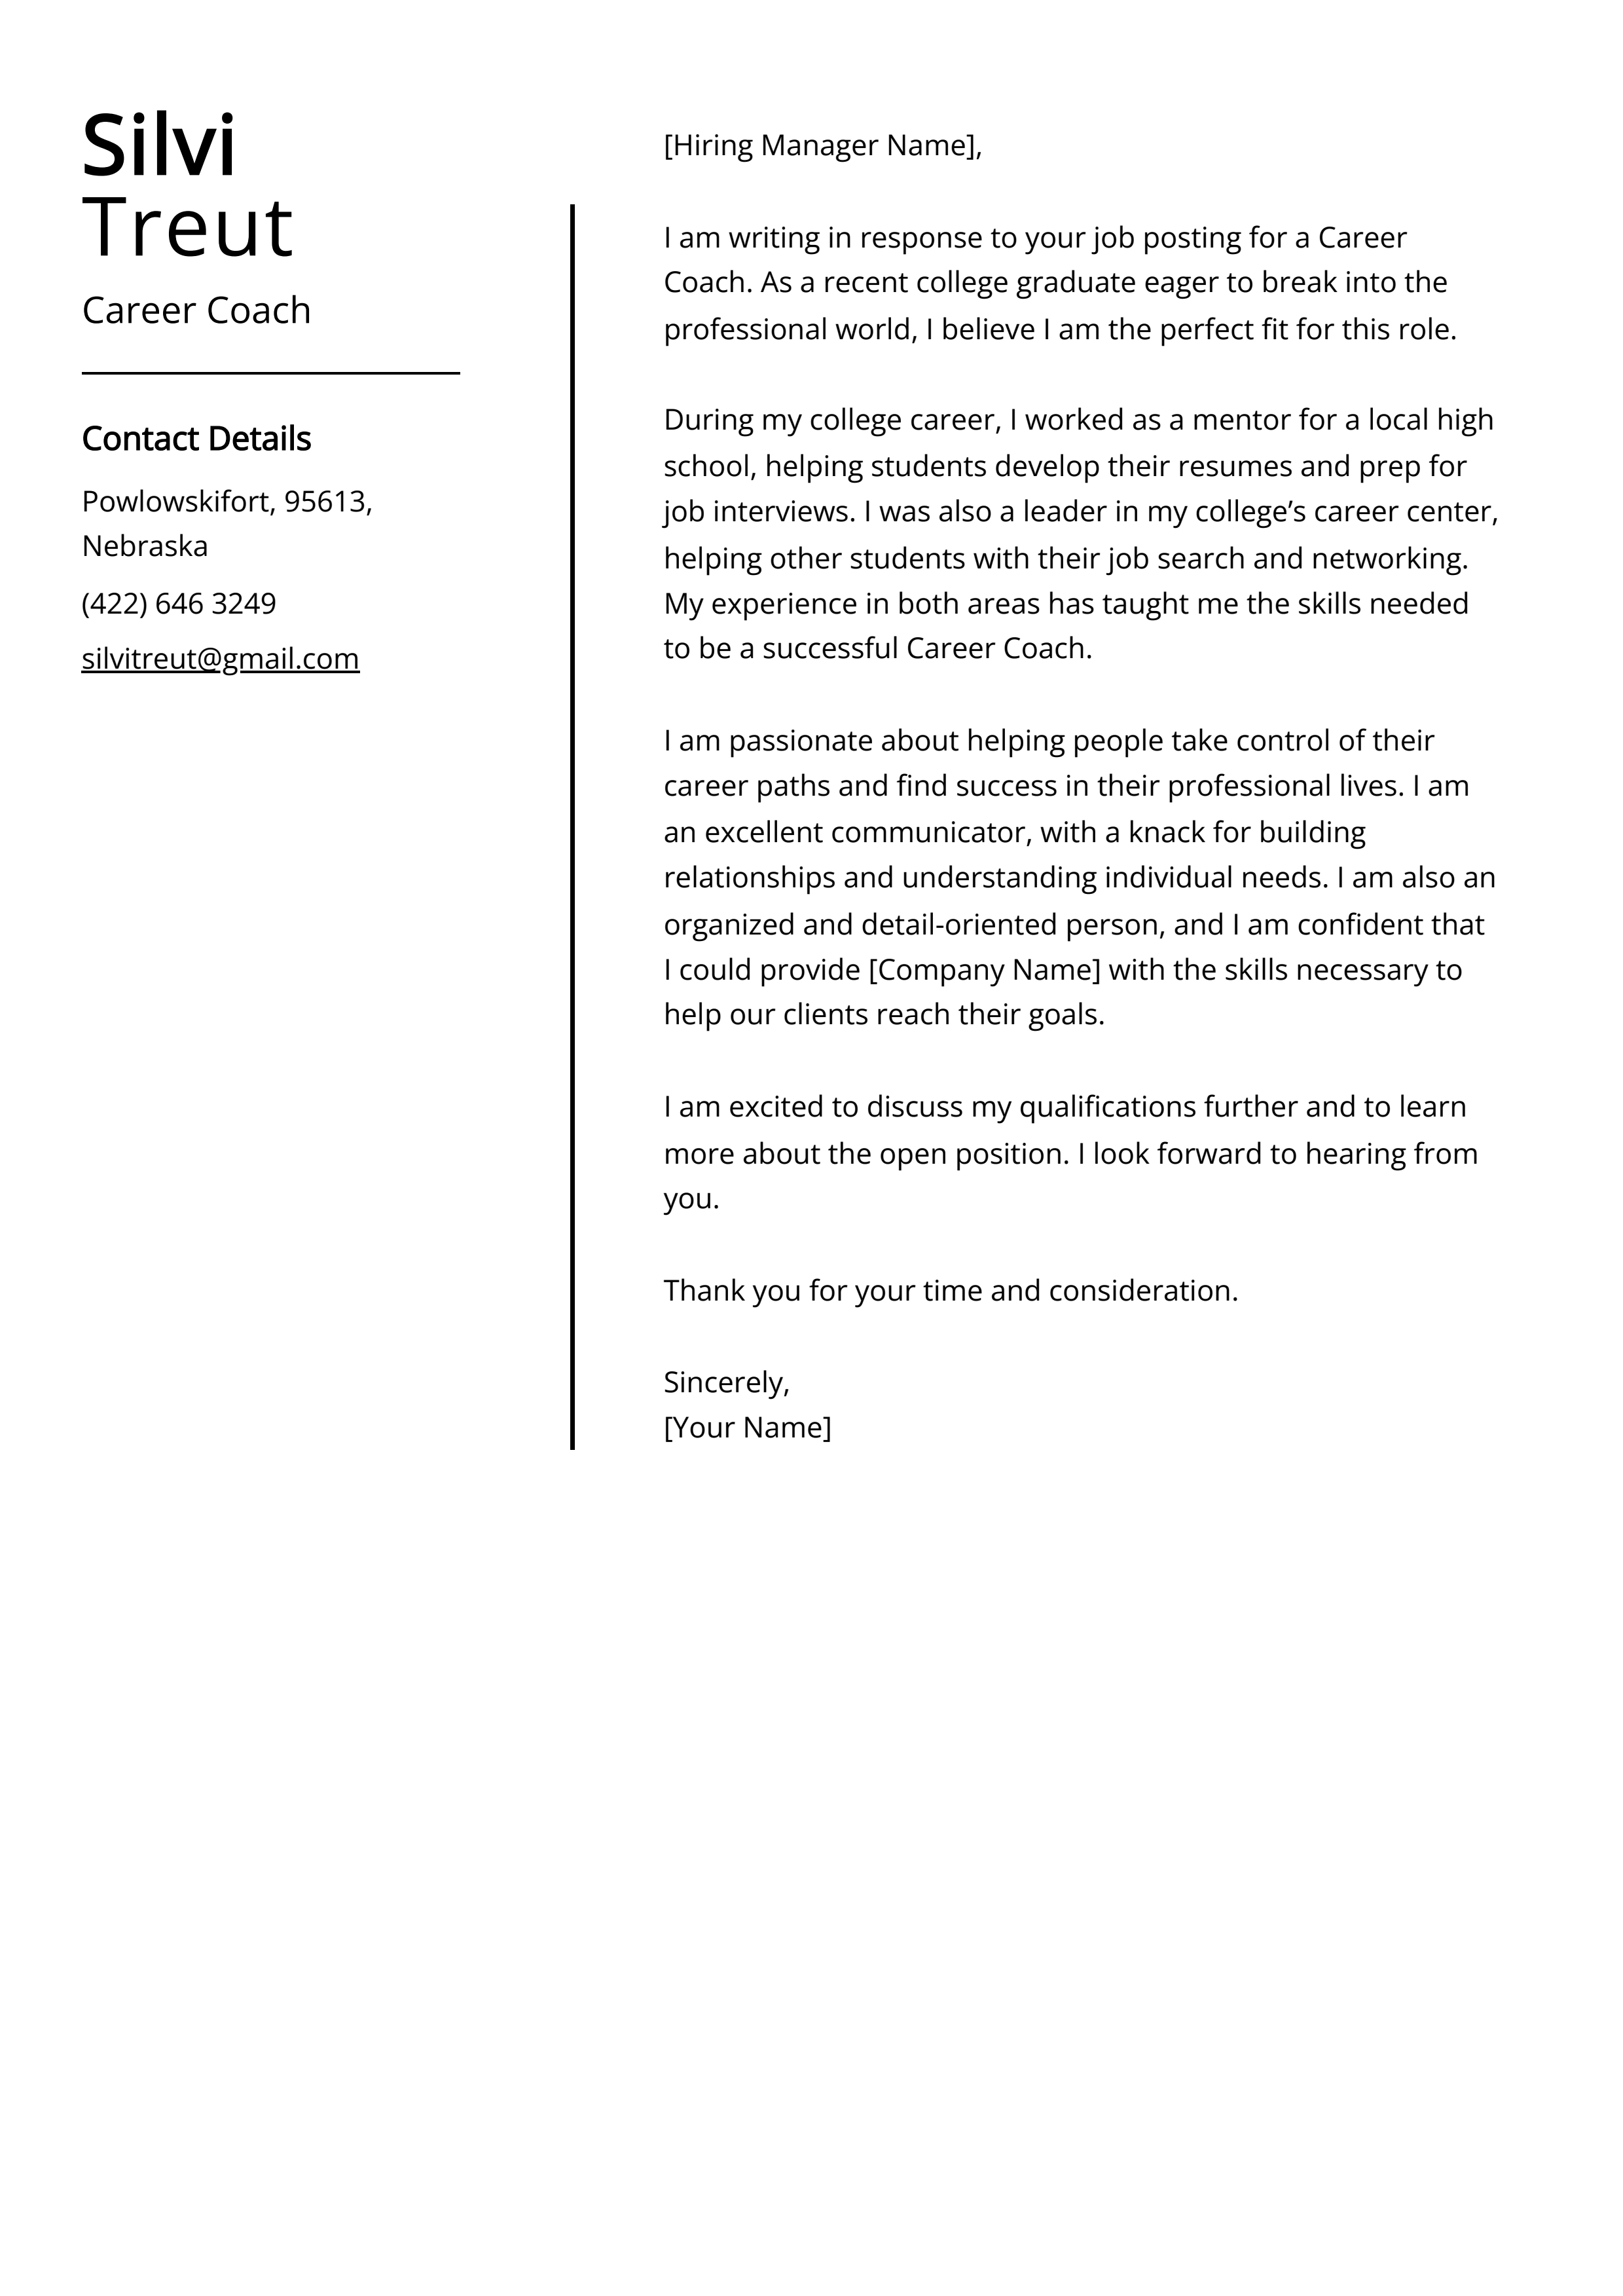 Career Coach Cover Letter Example